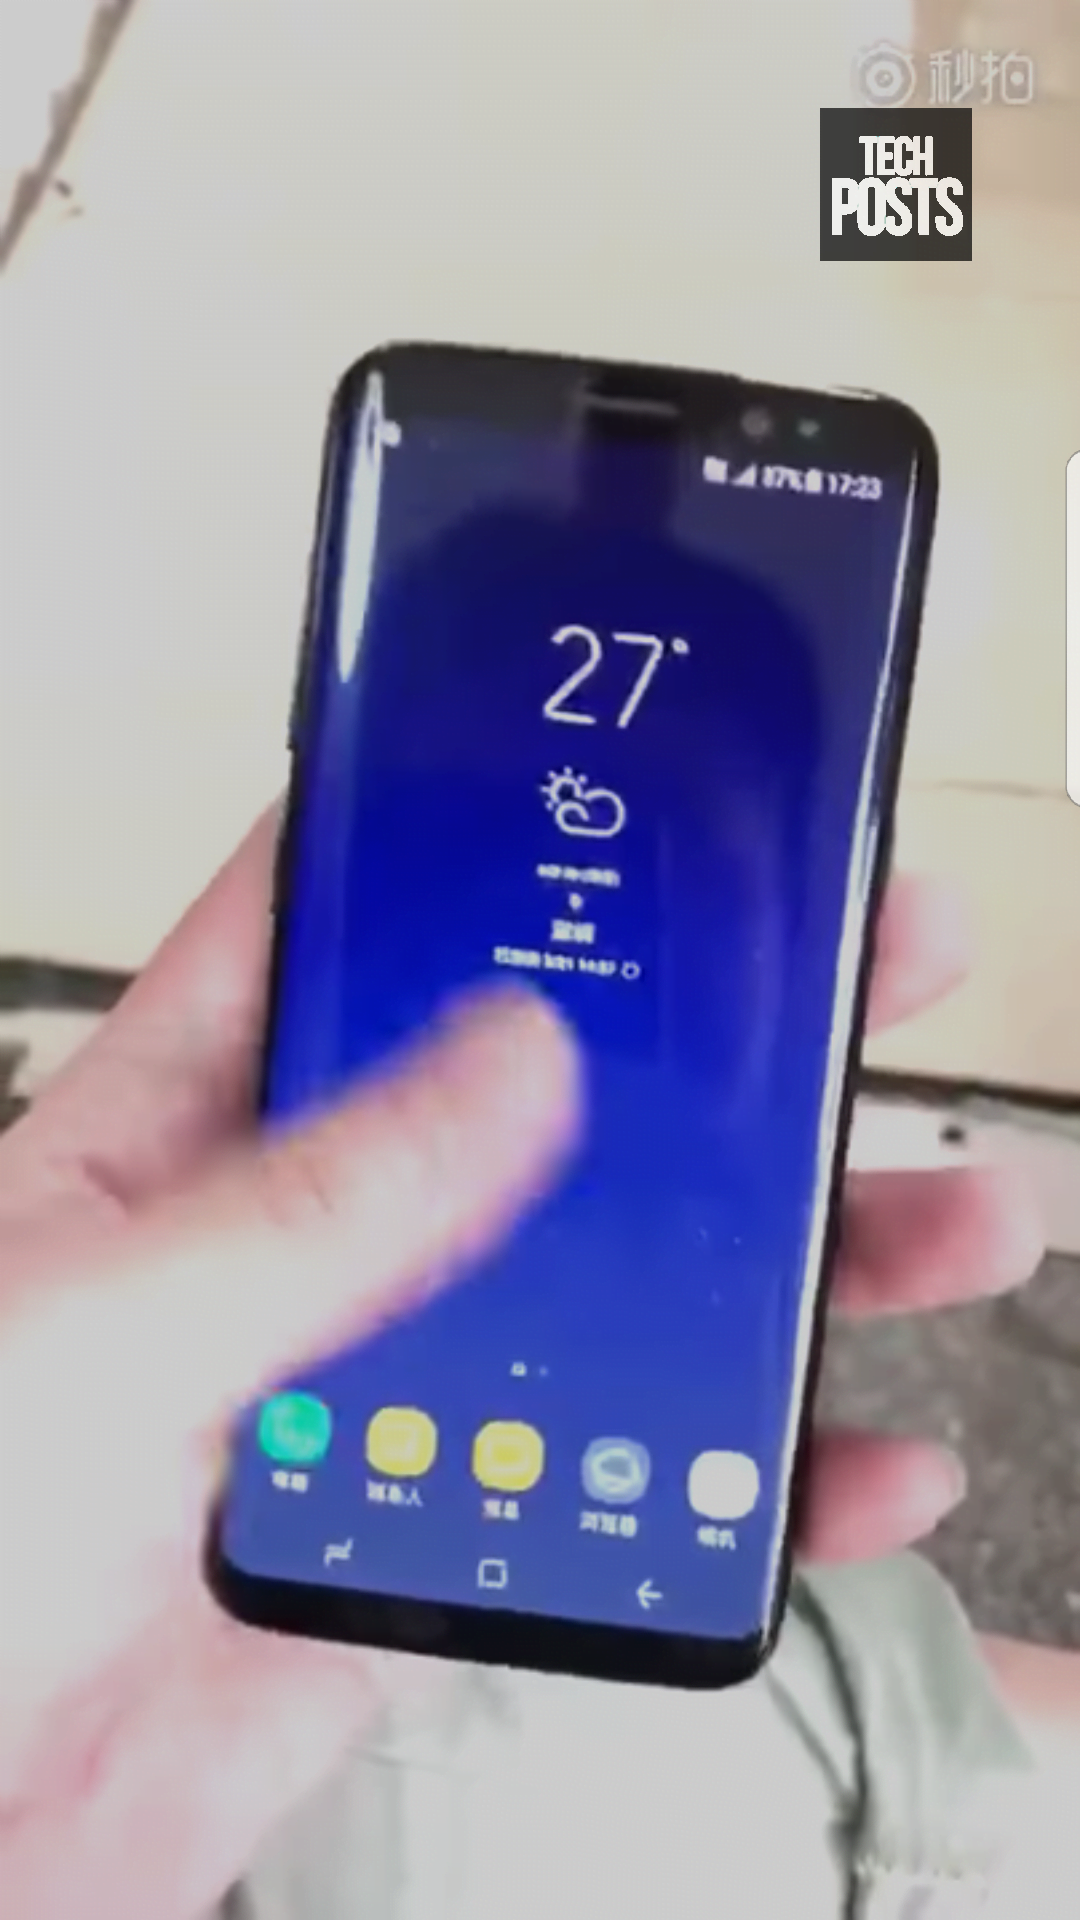 Leaked video and footage of Samsung S8